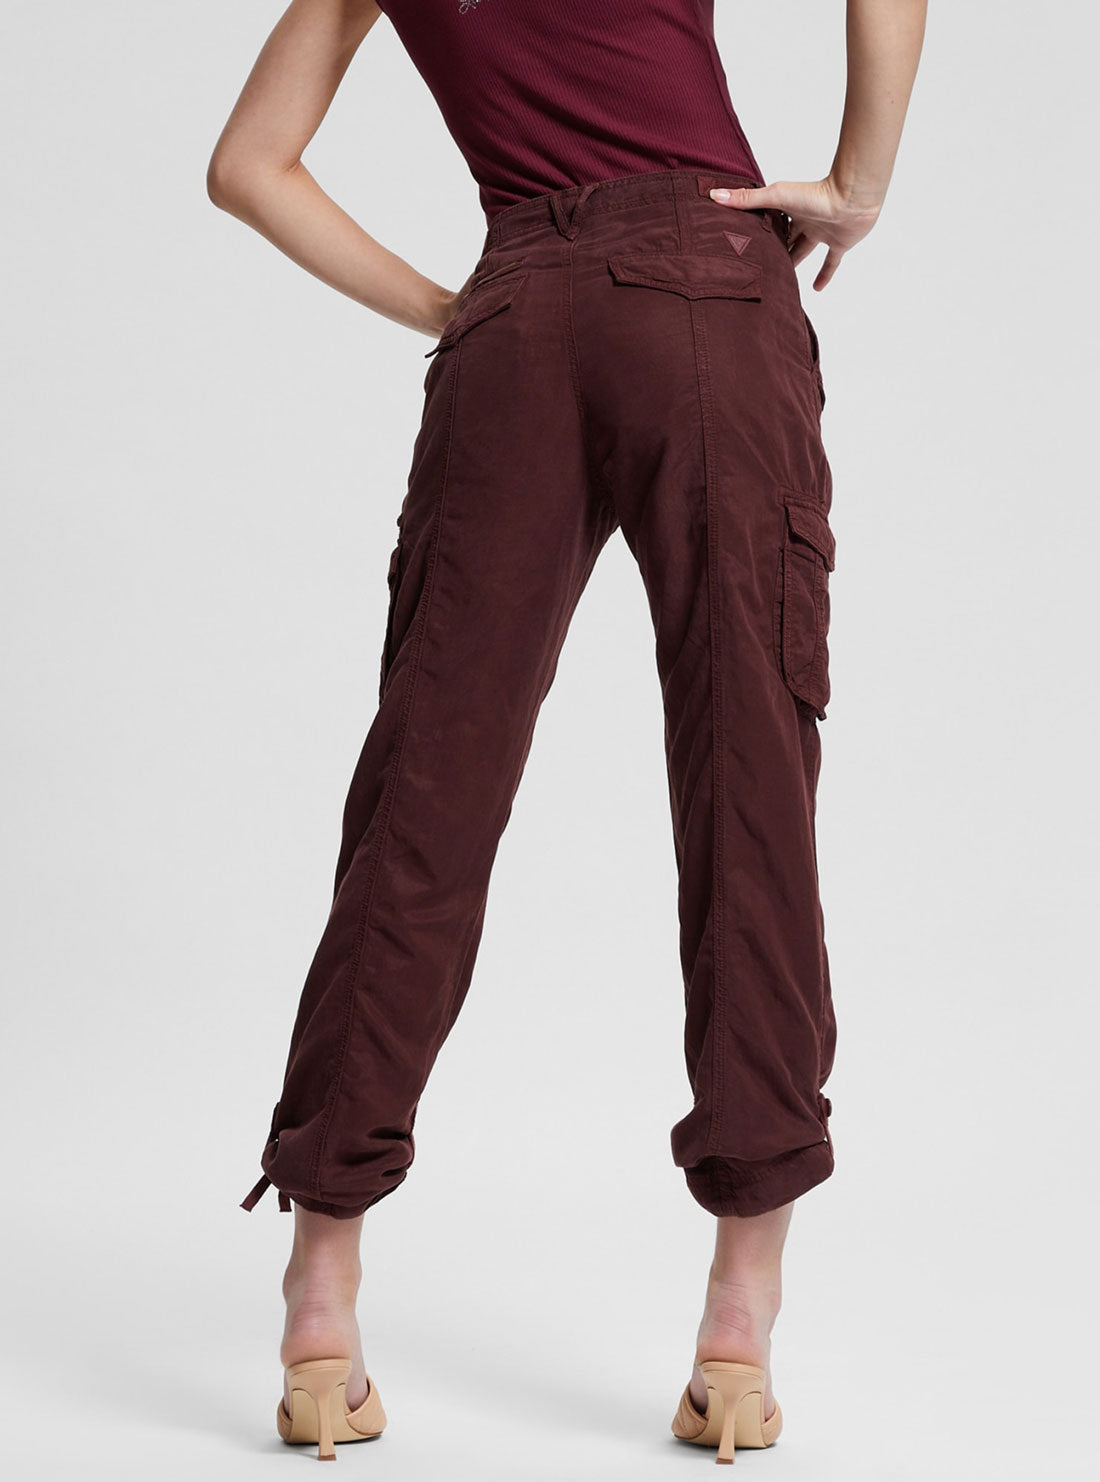 Eco Maroon Nessi Cargo Pants | GUESS Women's Apparel | back view